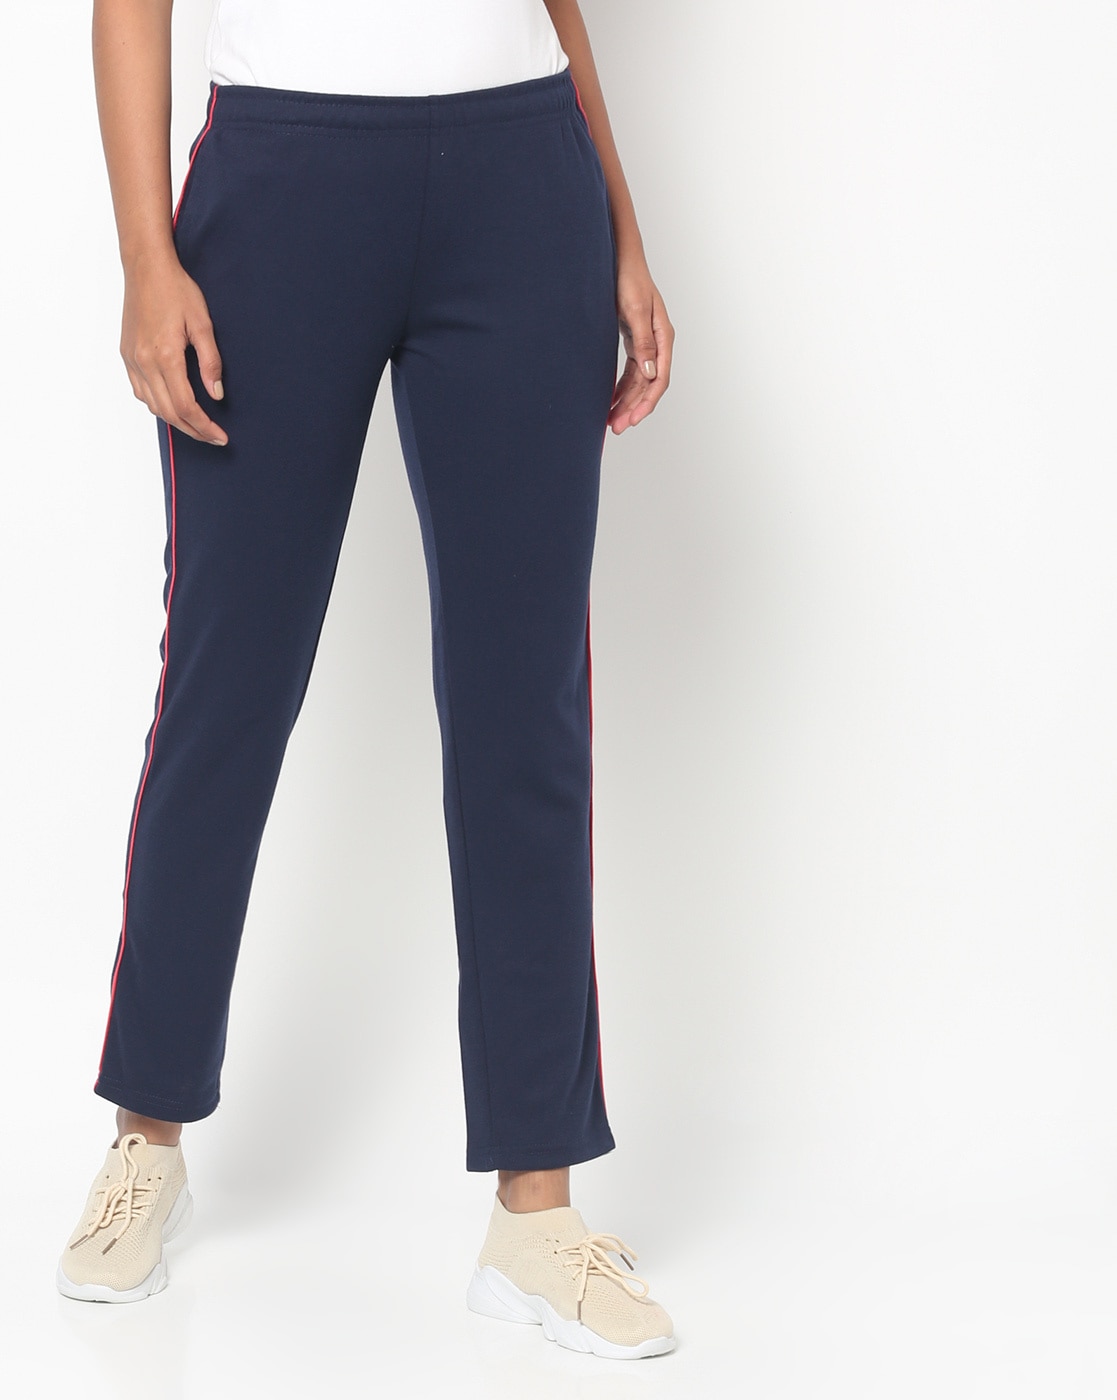 Track Pants with Piping - Dark blue/color-block - Ladies | H&M US